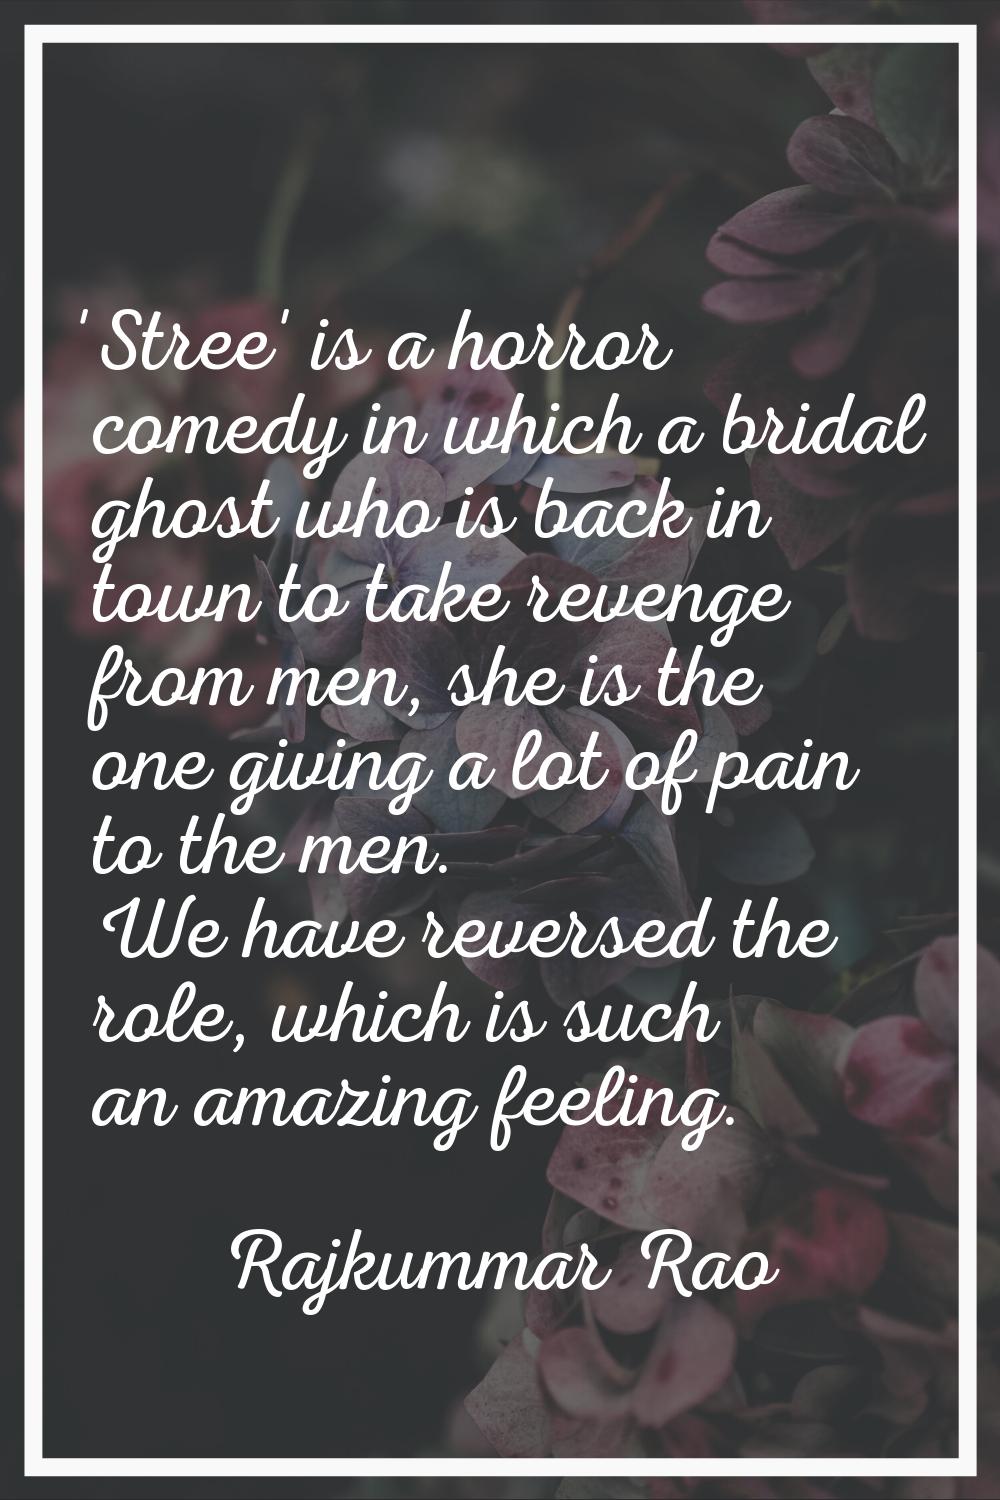 'Stree' is a horror comedy in which a bridal ghost who is back in town to take revenge from men, sh